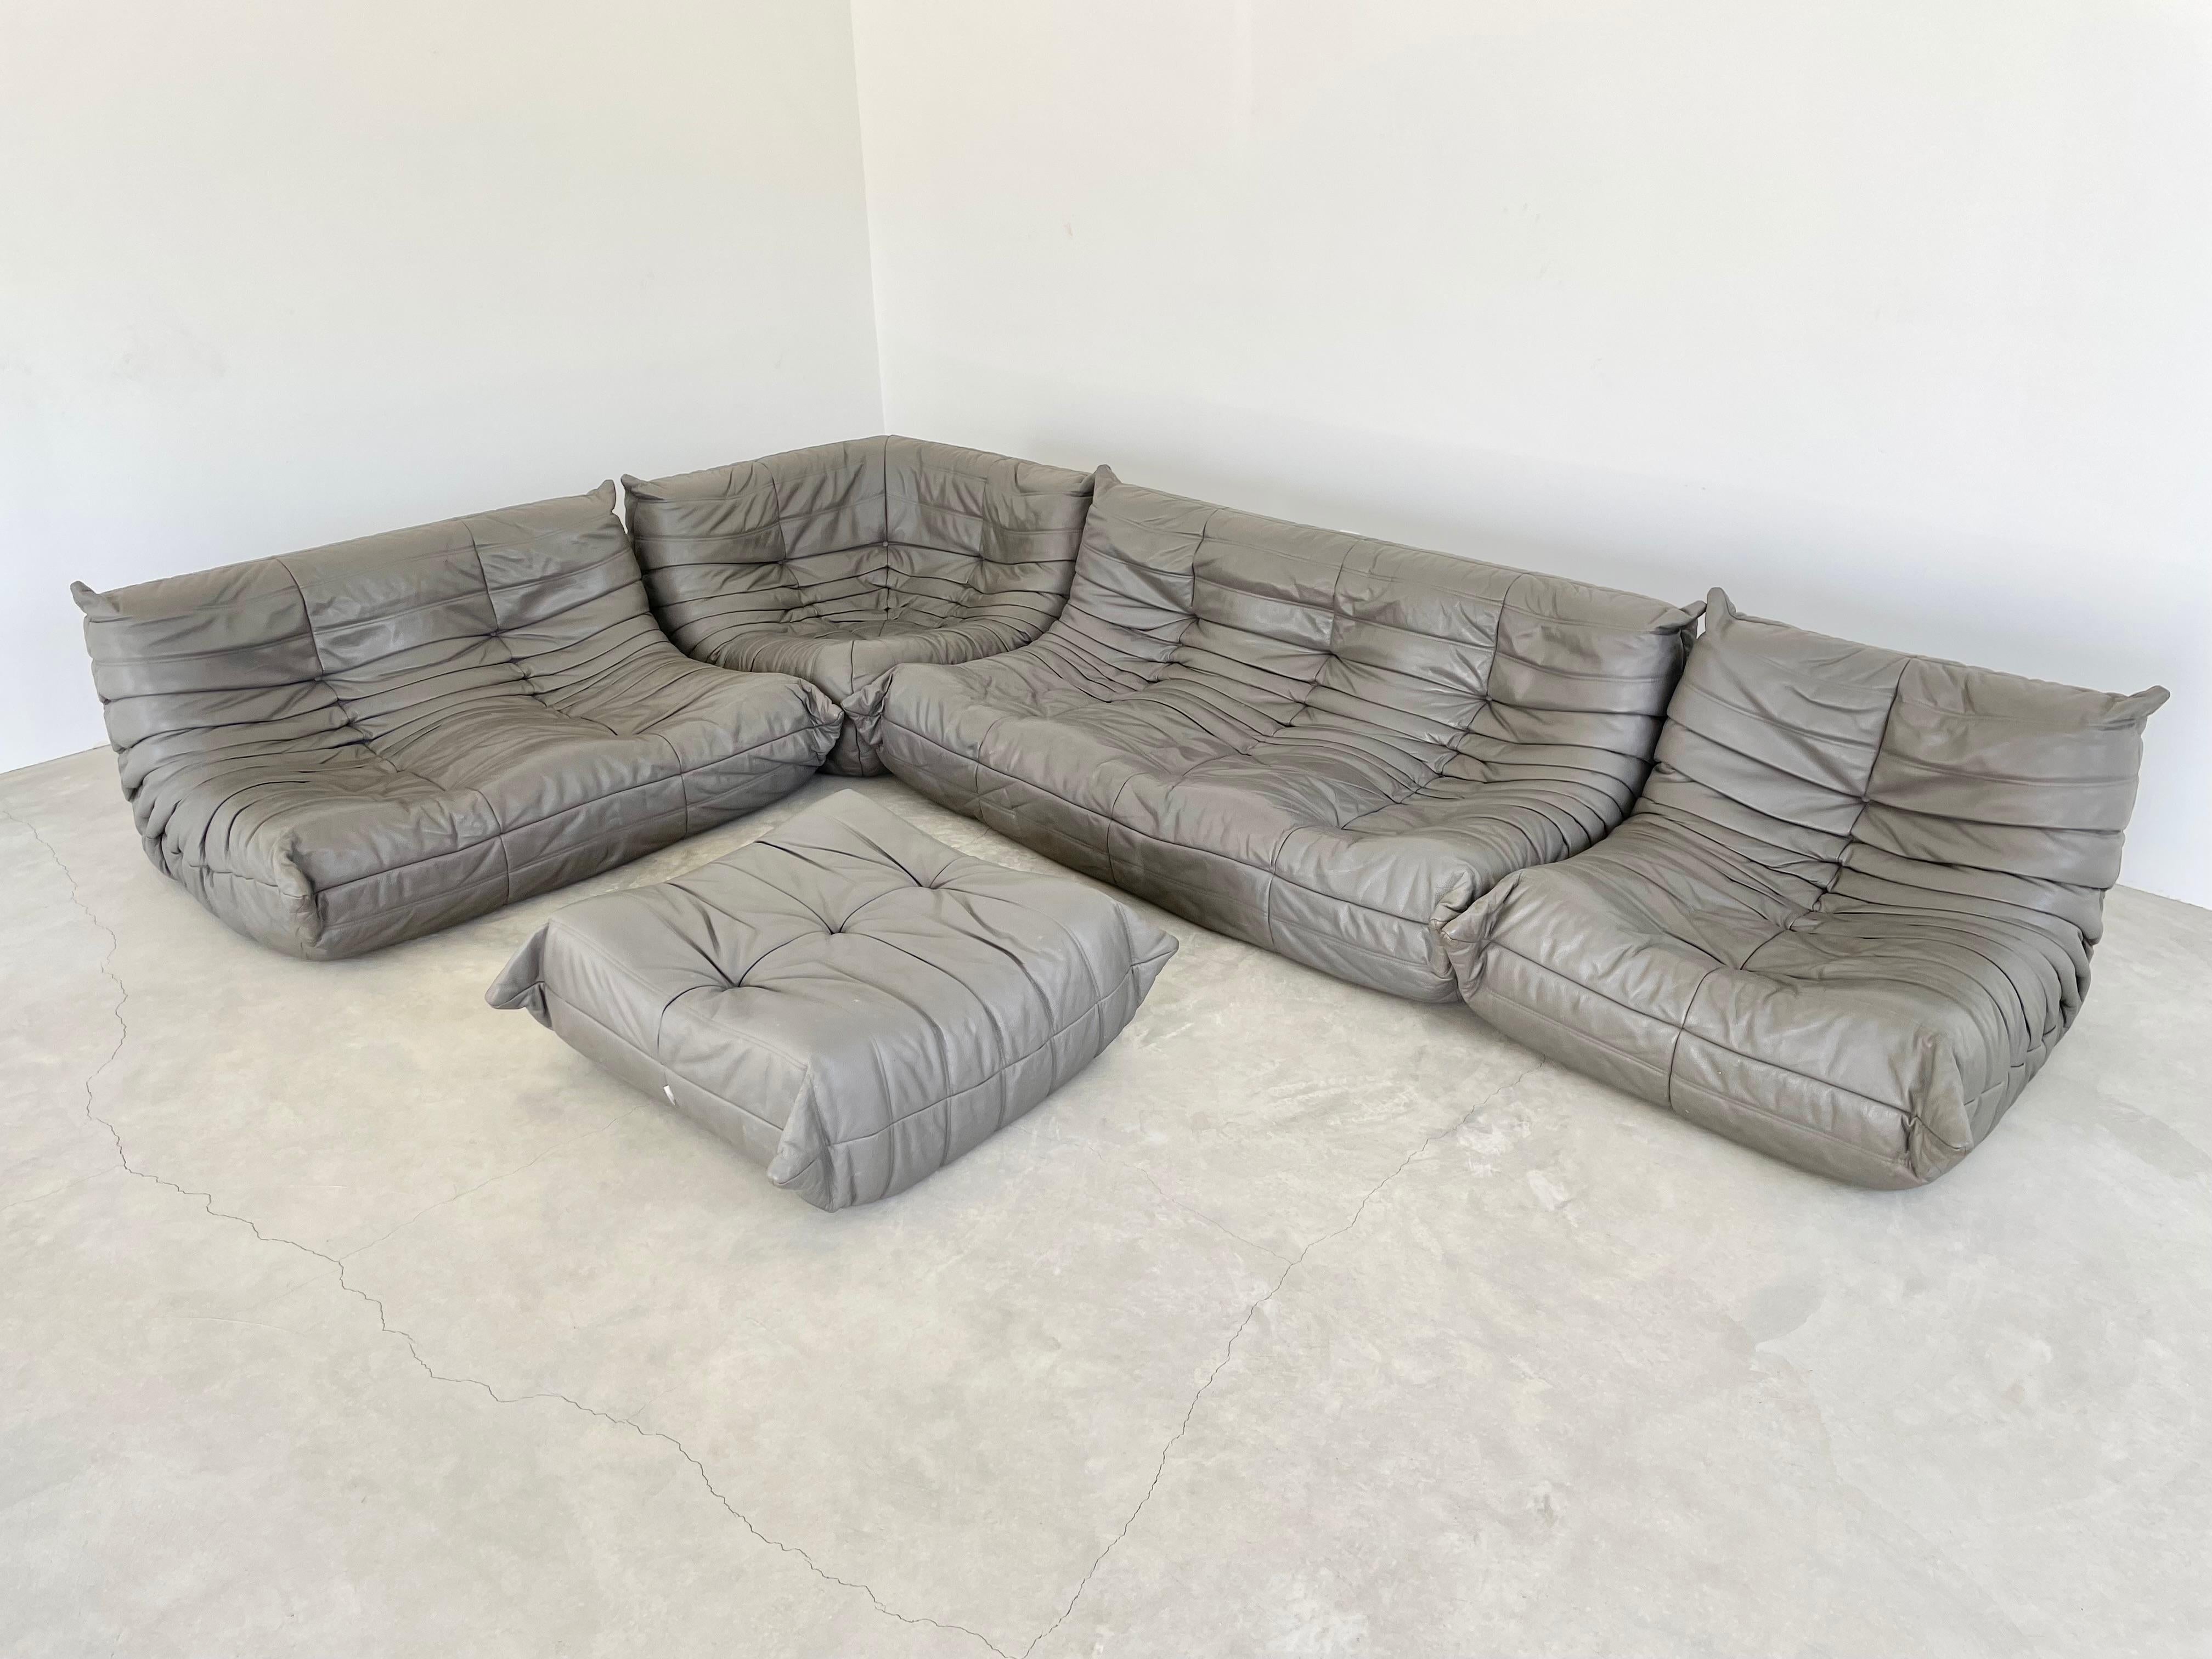 Classic French Togo set by Michel Ducaroy for luxury brand Ligne Roset. Originally designed in the 1970s the iconic togo sofa is now a design classic. This set comes in its original vintage gray leather.

Timeless comfort and style make this